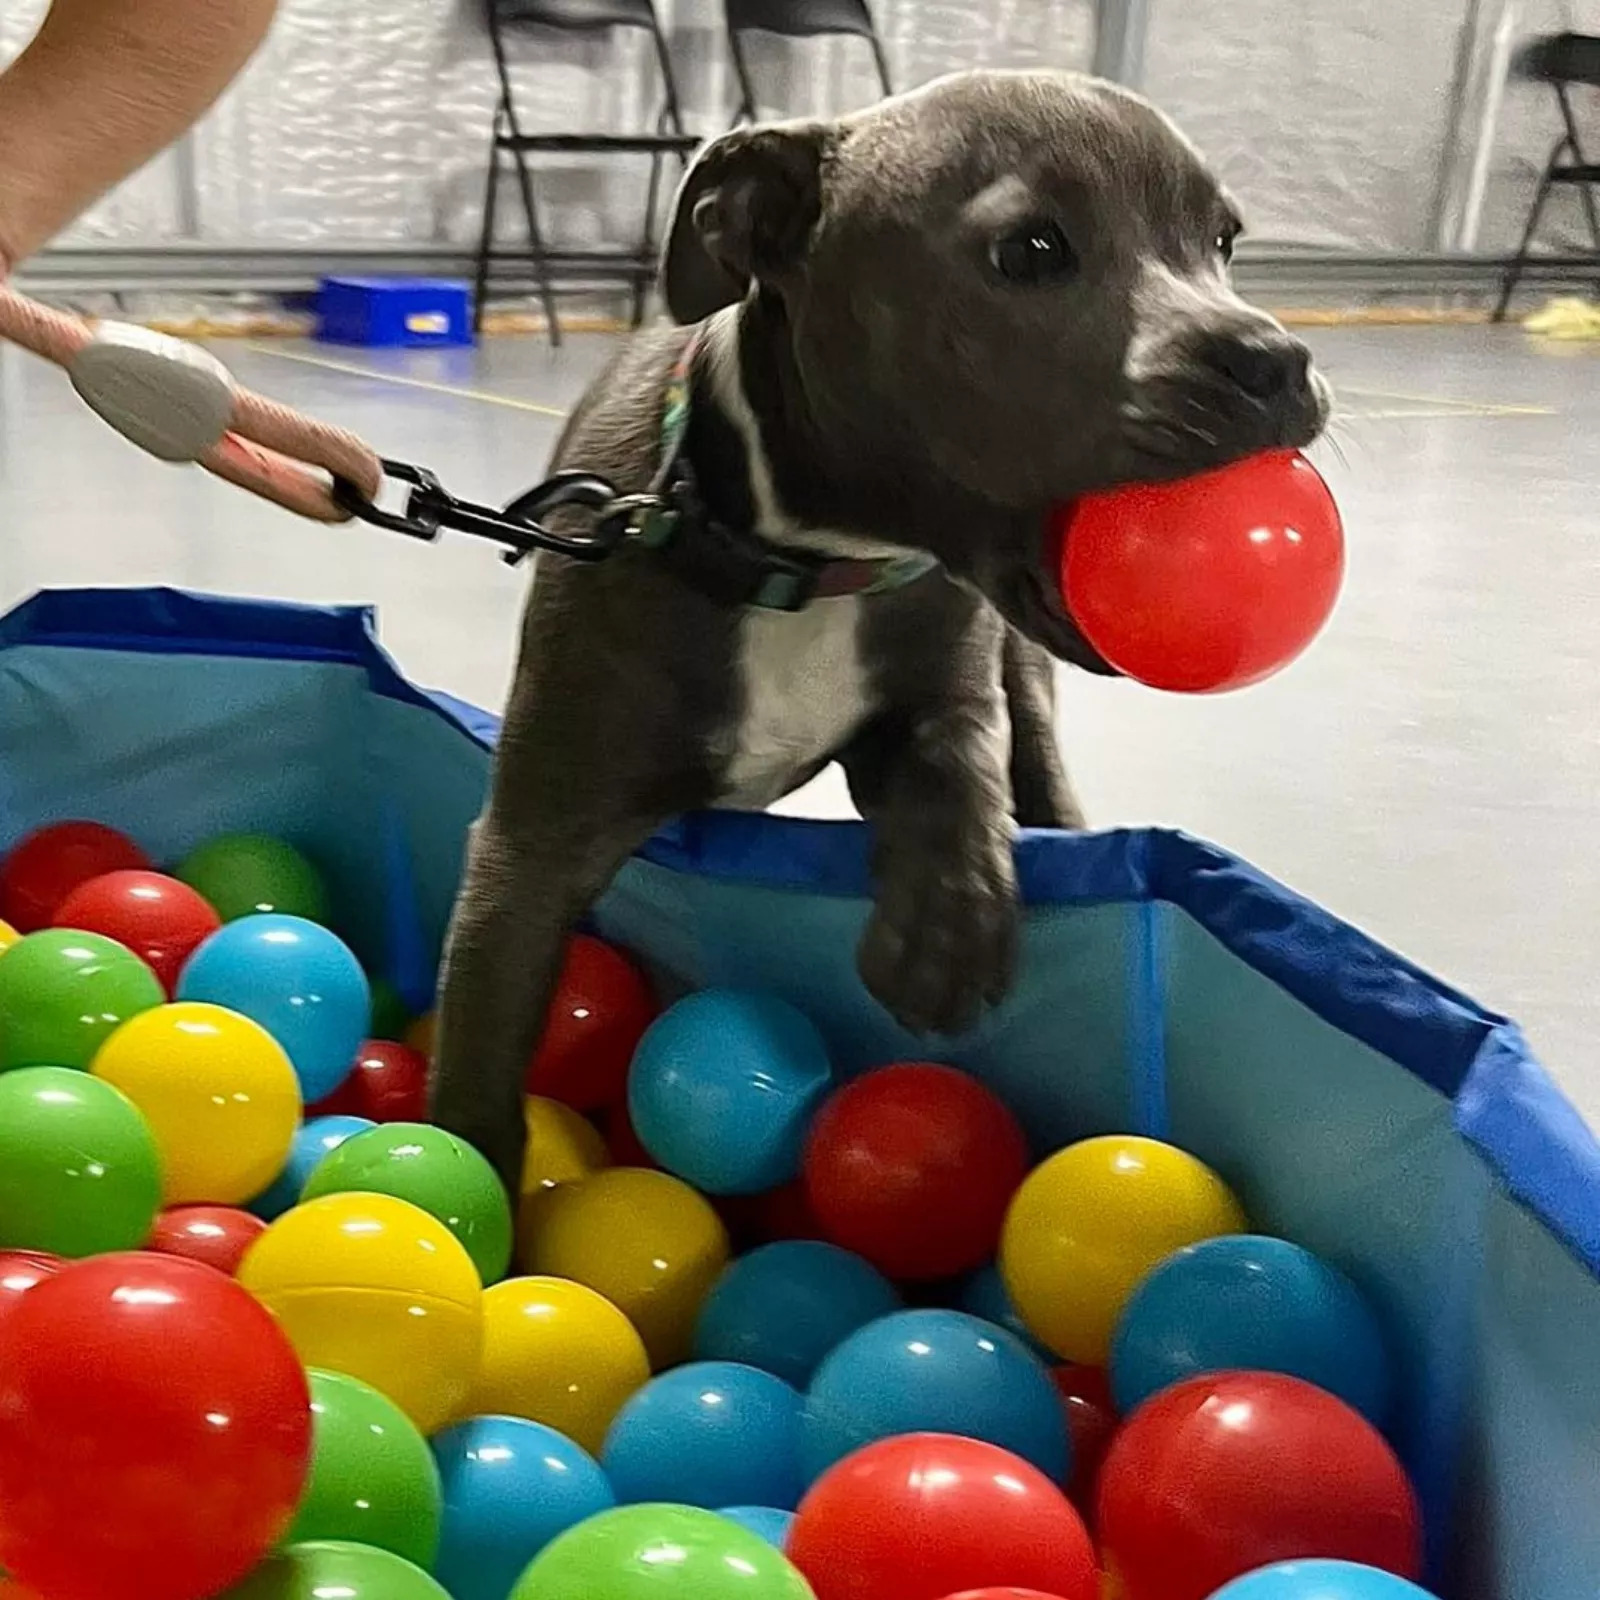 Jethro, a blue staffy puppy, grabbing a red ball from a ball pit